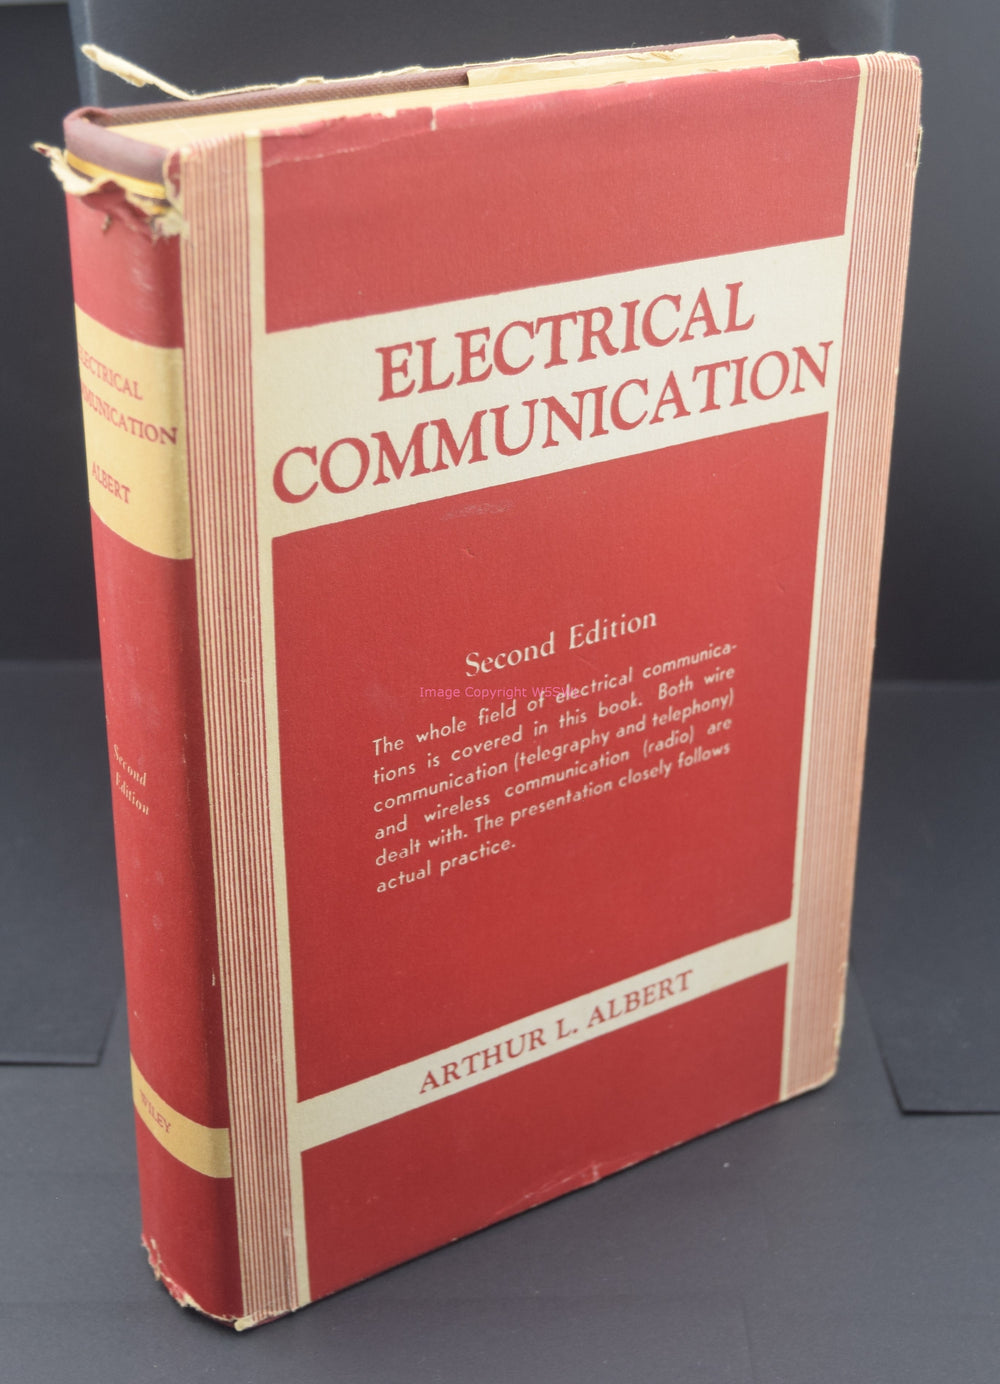 Electrical Communication by Arthur L Albert 2nd Edition 1940 - Dave's Hobby Shop by W5SWL